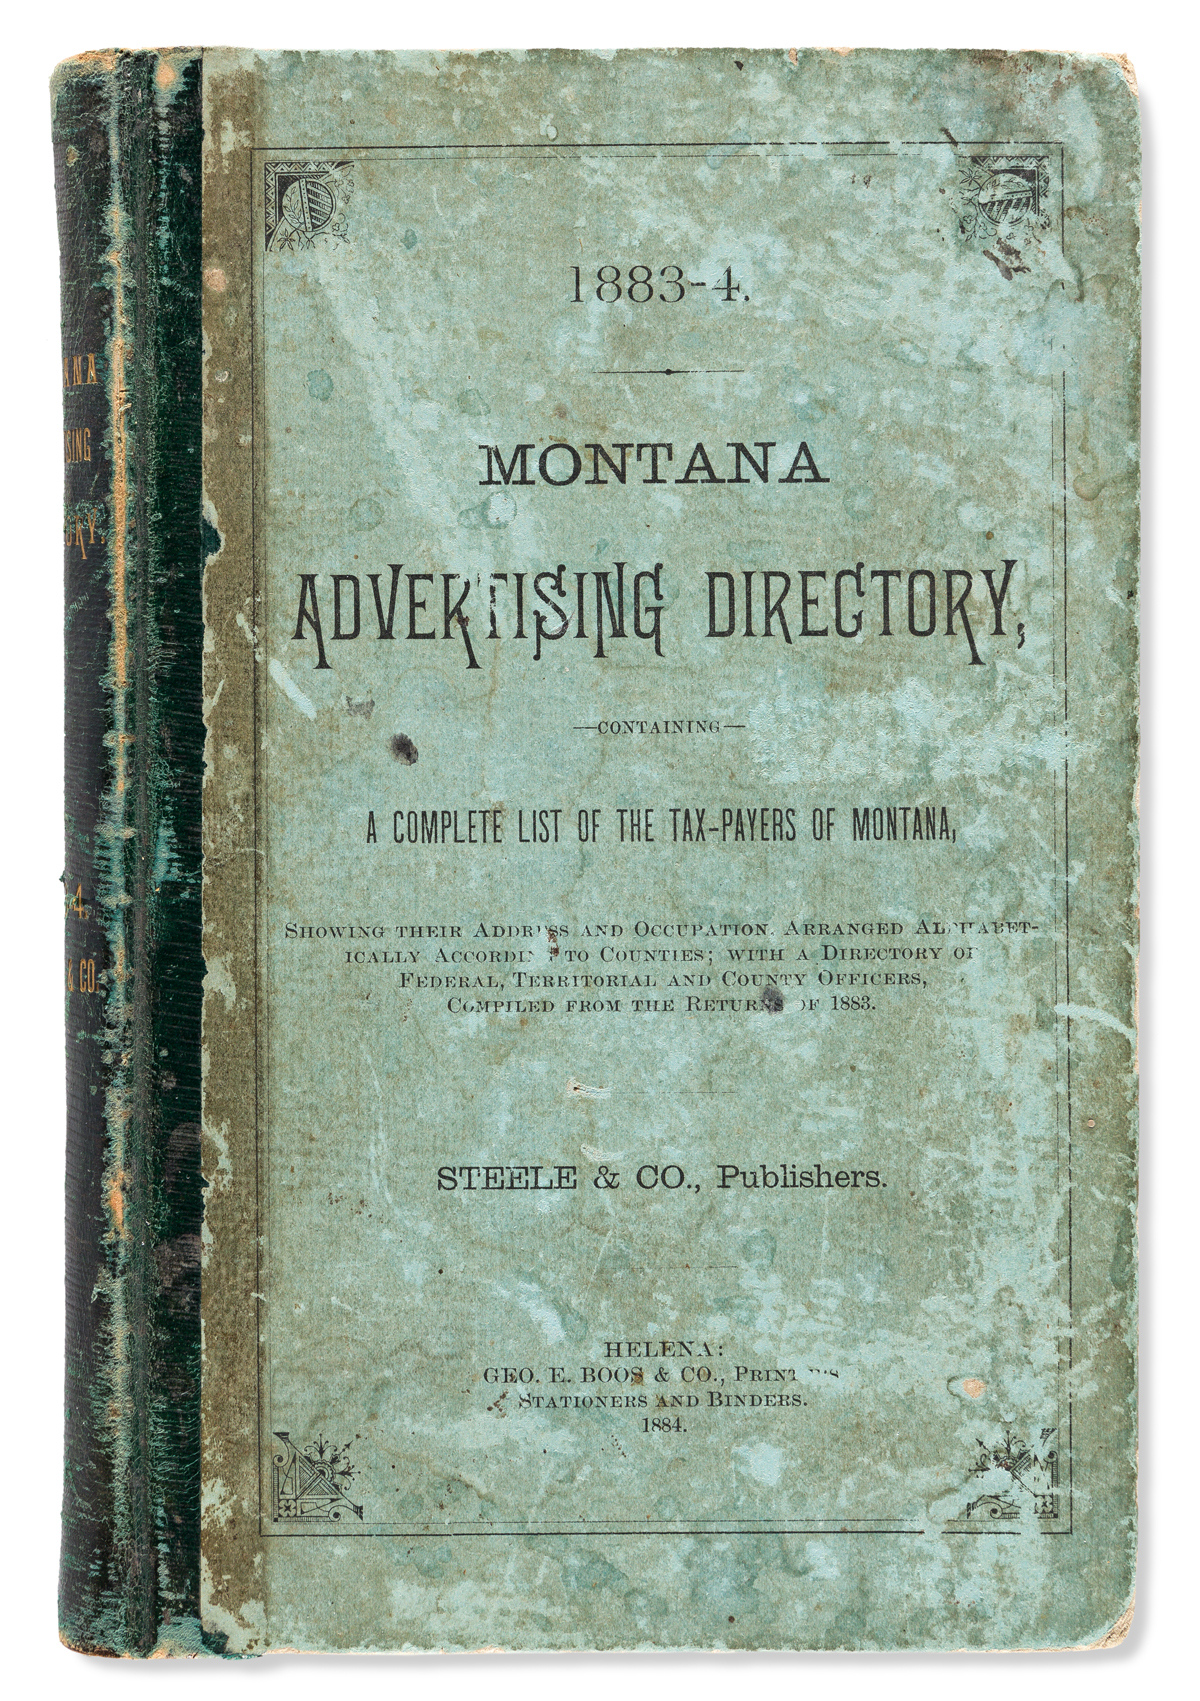 (WEST--MONTANA.) 1883-4 Montana Advertising Directory, Containing a Complete List of the Tax-Payers of Montana.